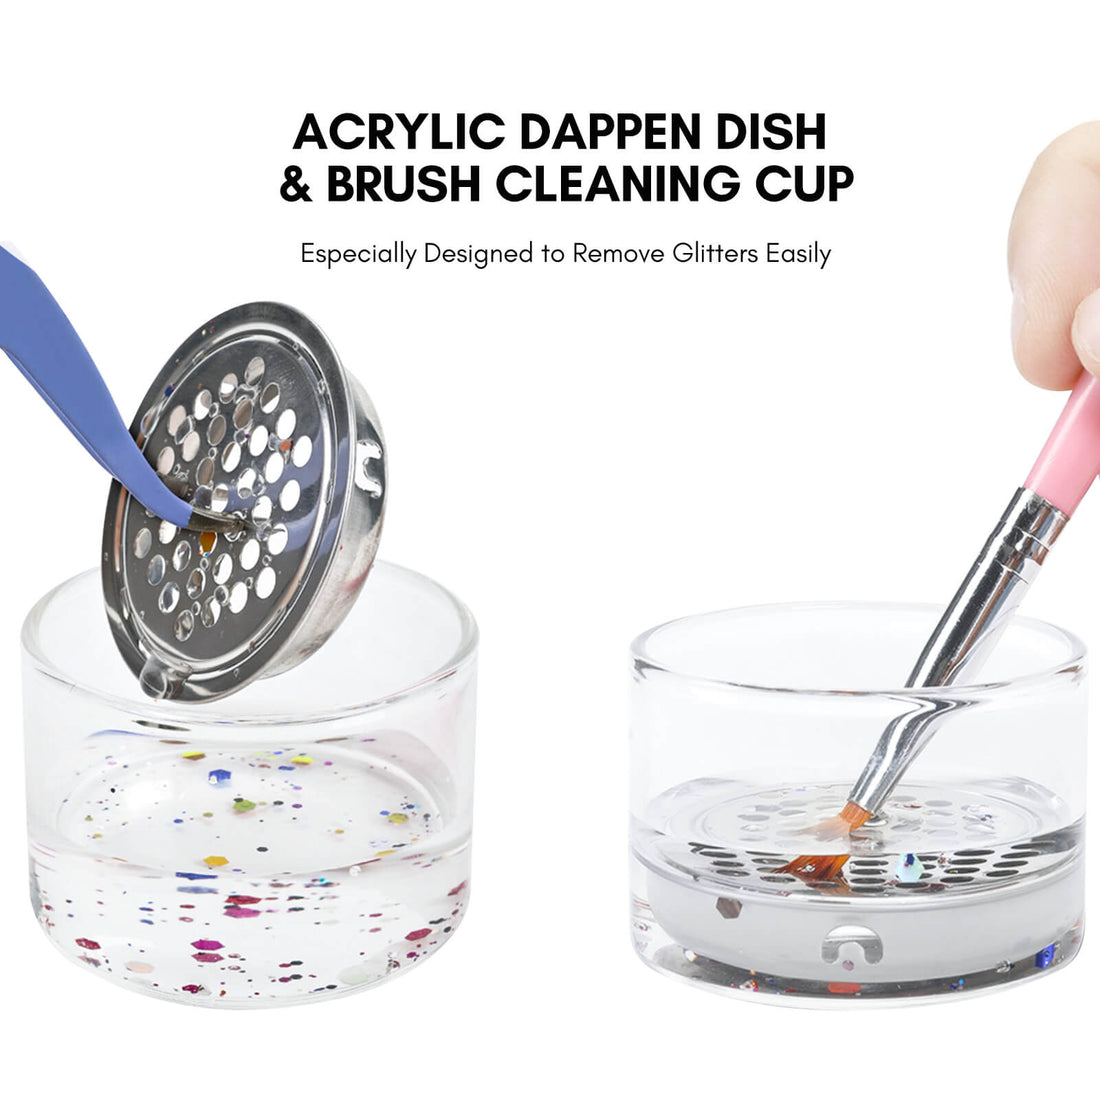 glass-brush-cleaning-cup-dappen-dish-pro-show